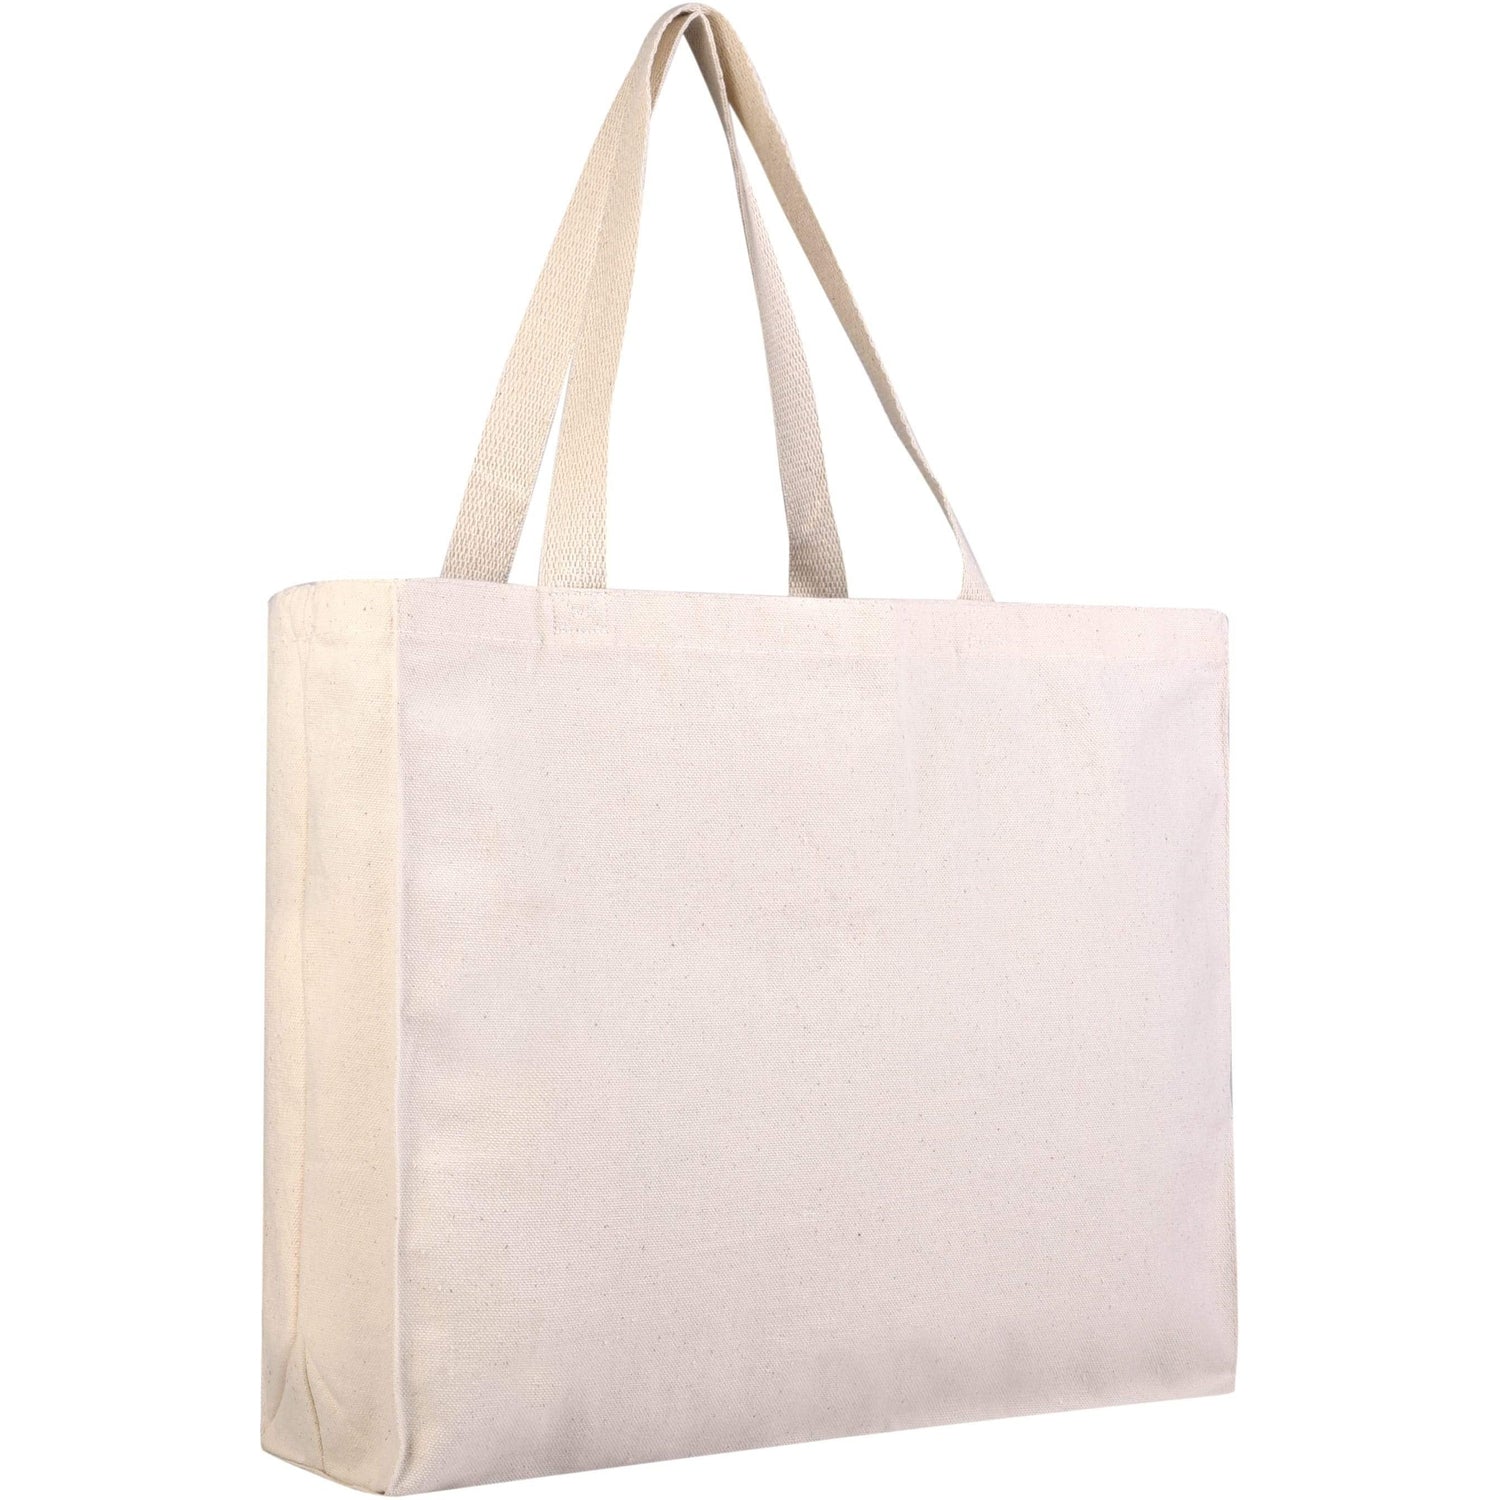 canvas tote bags wholesale